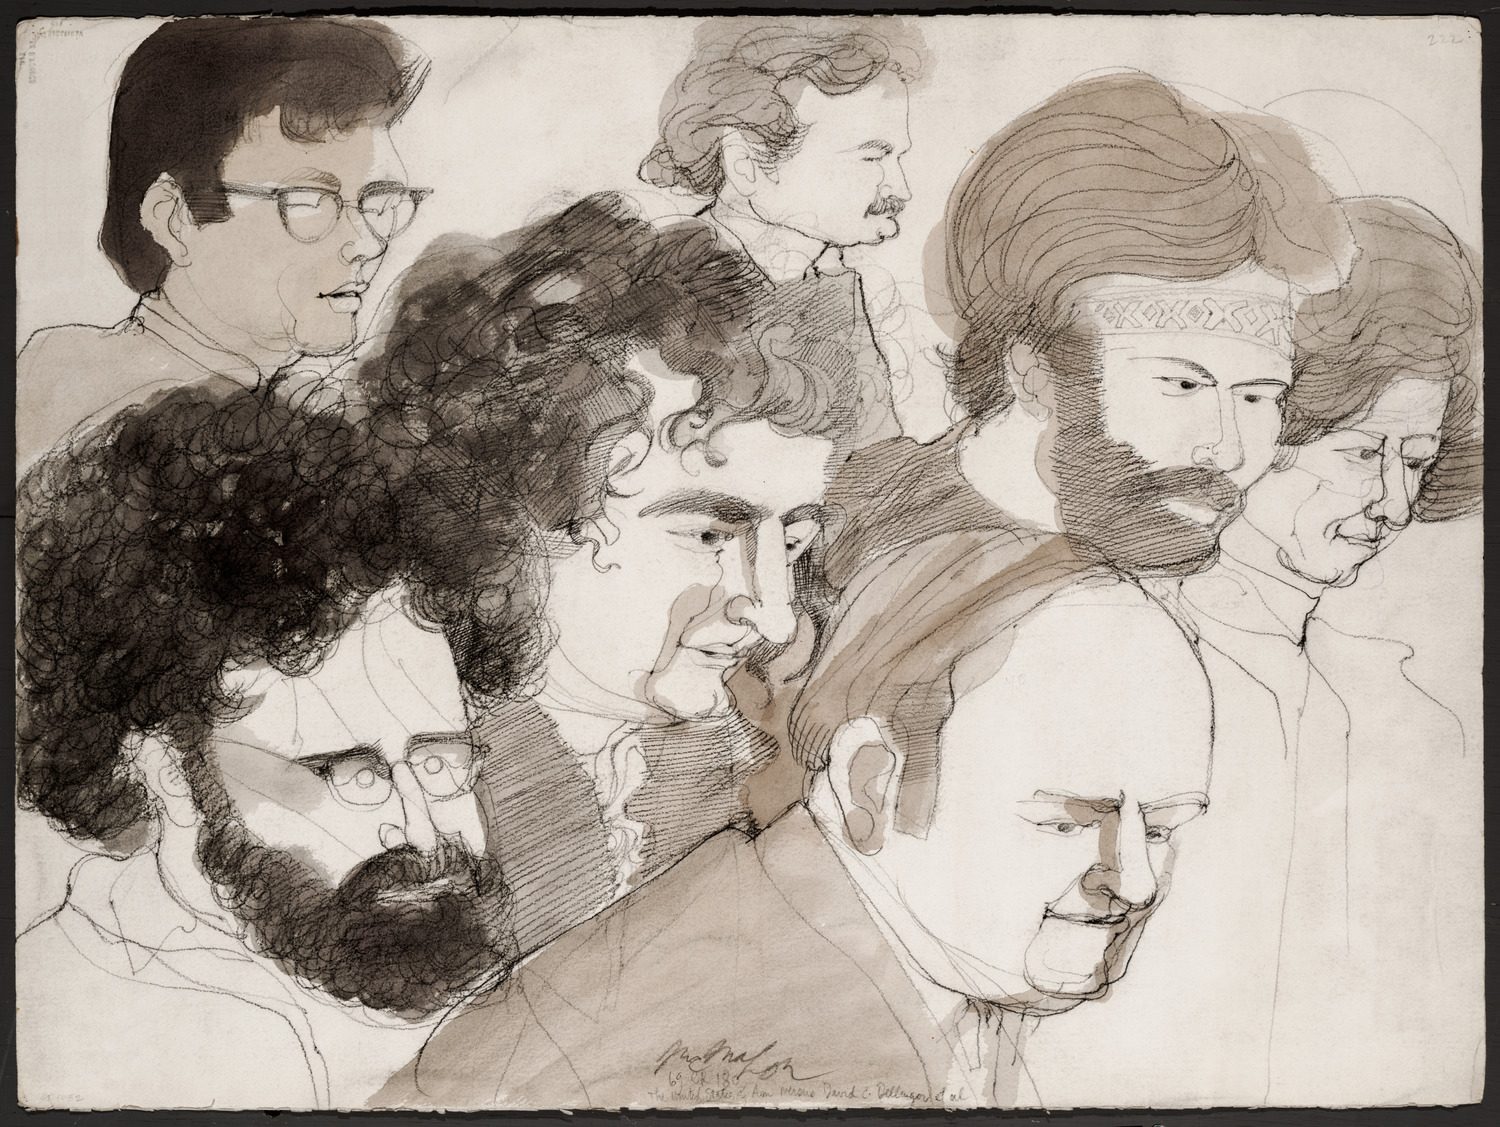 Illustrated profile view of all the Chicago Seven Trial defendants.